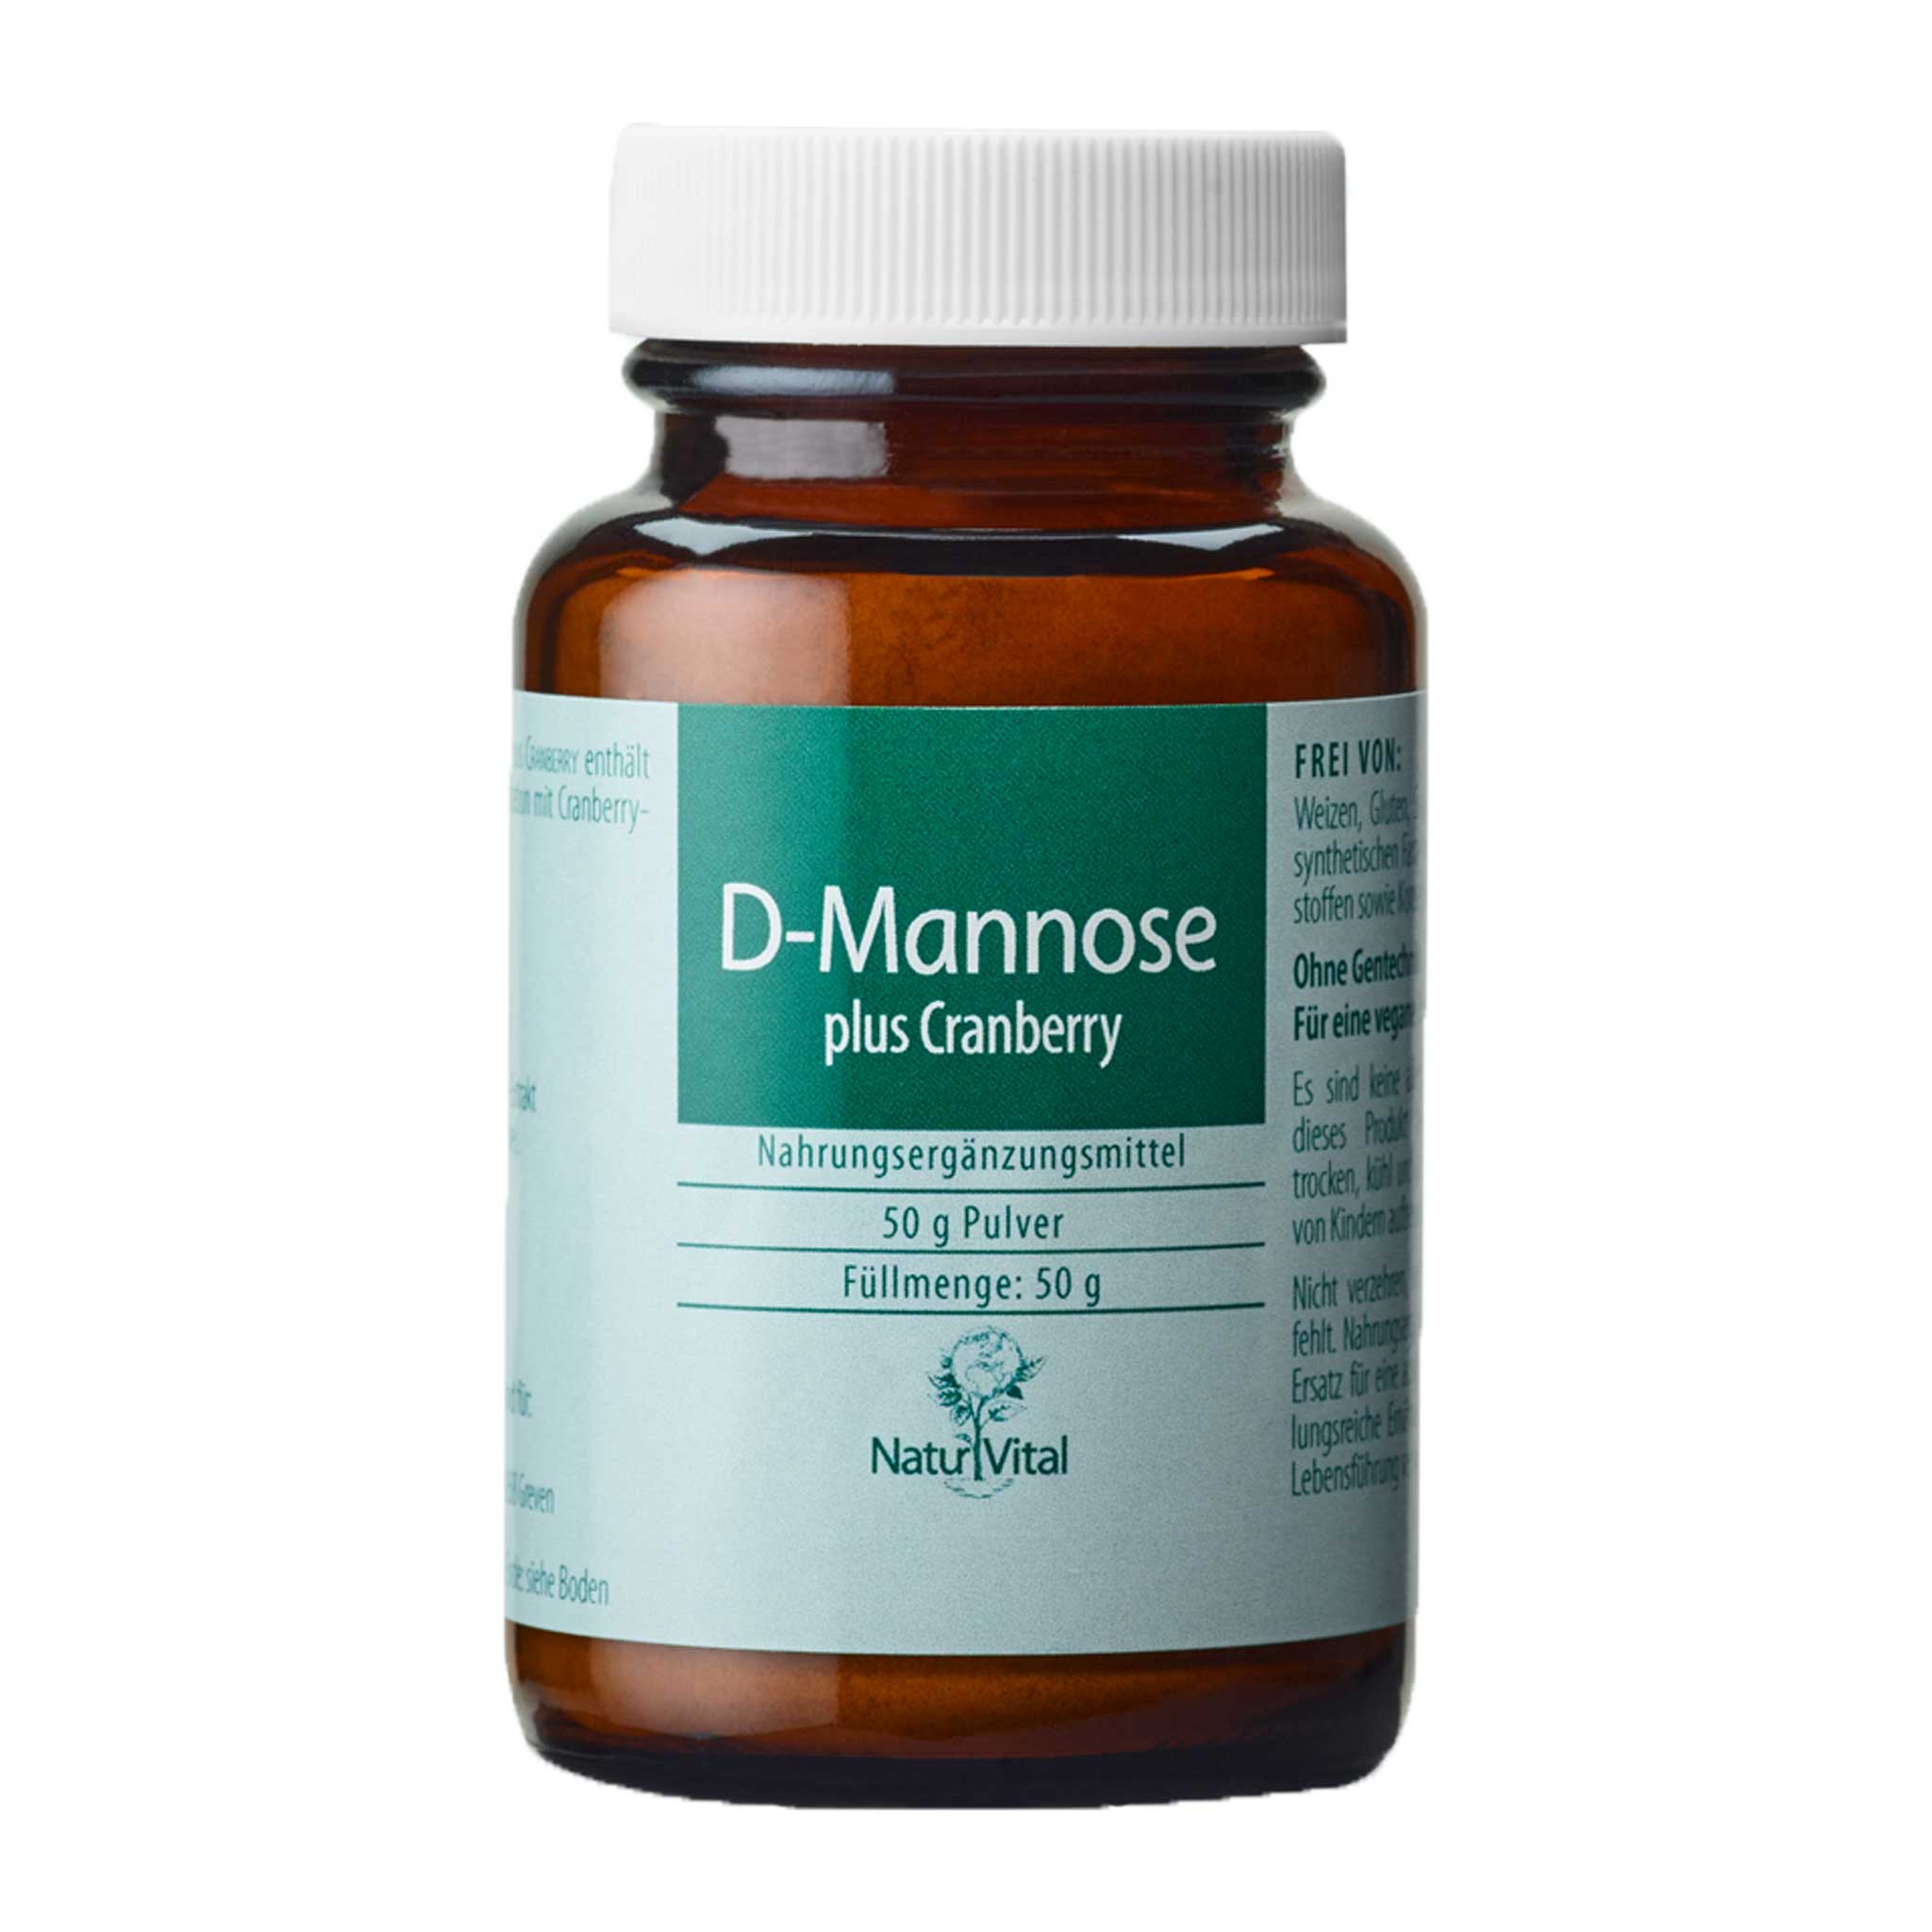 D-Mannose plus cranberry, 50 g special offer best before 31.03.2024